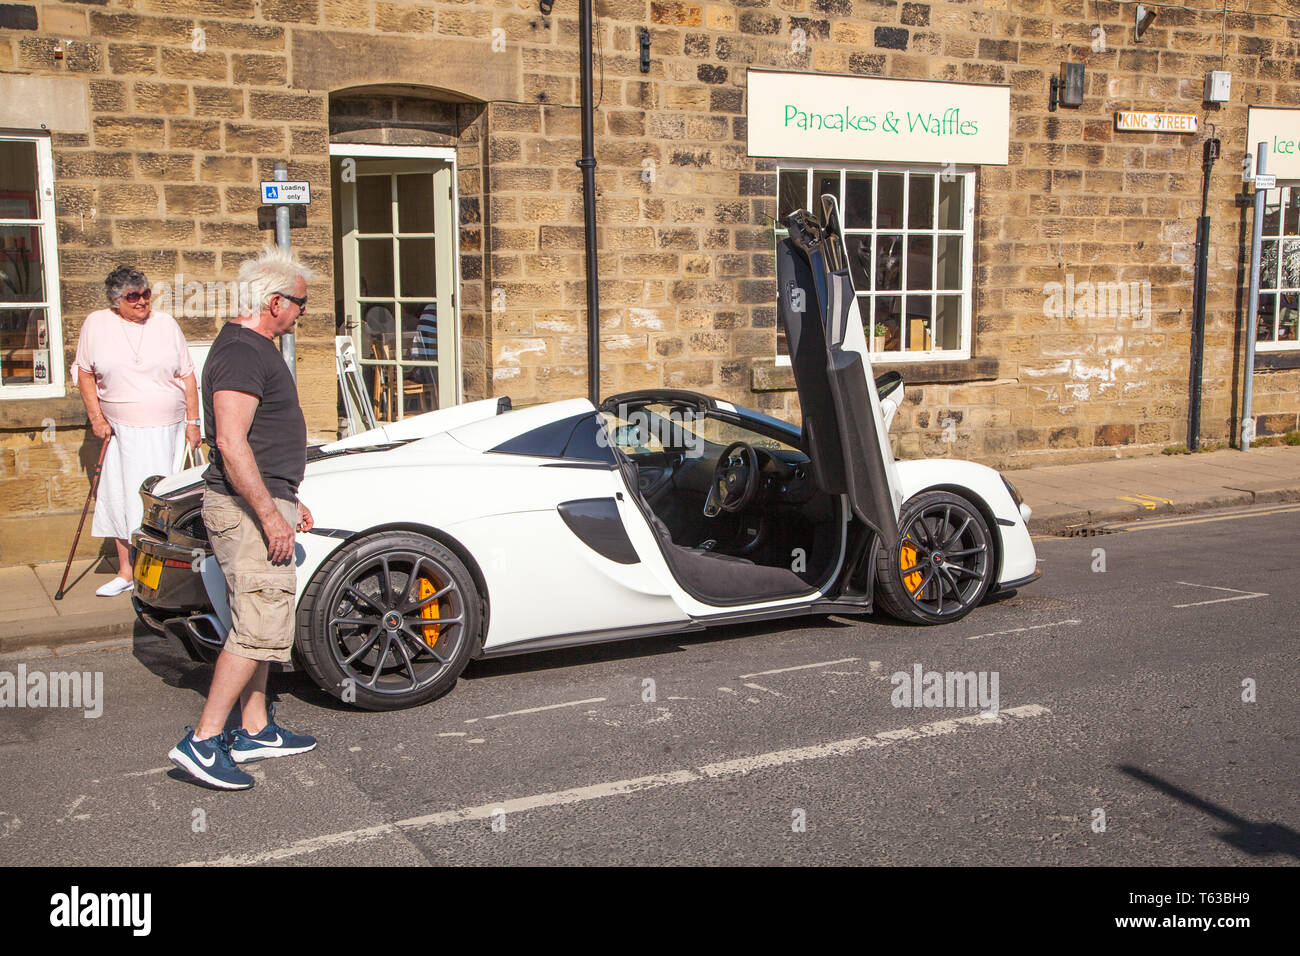 McLaren sports car being admired by two people standing at the roadside Stock Photo